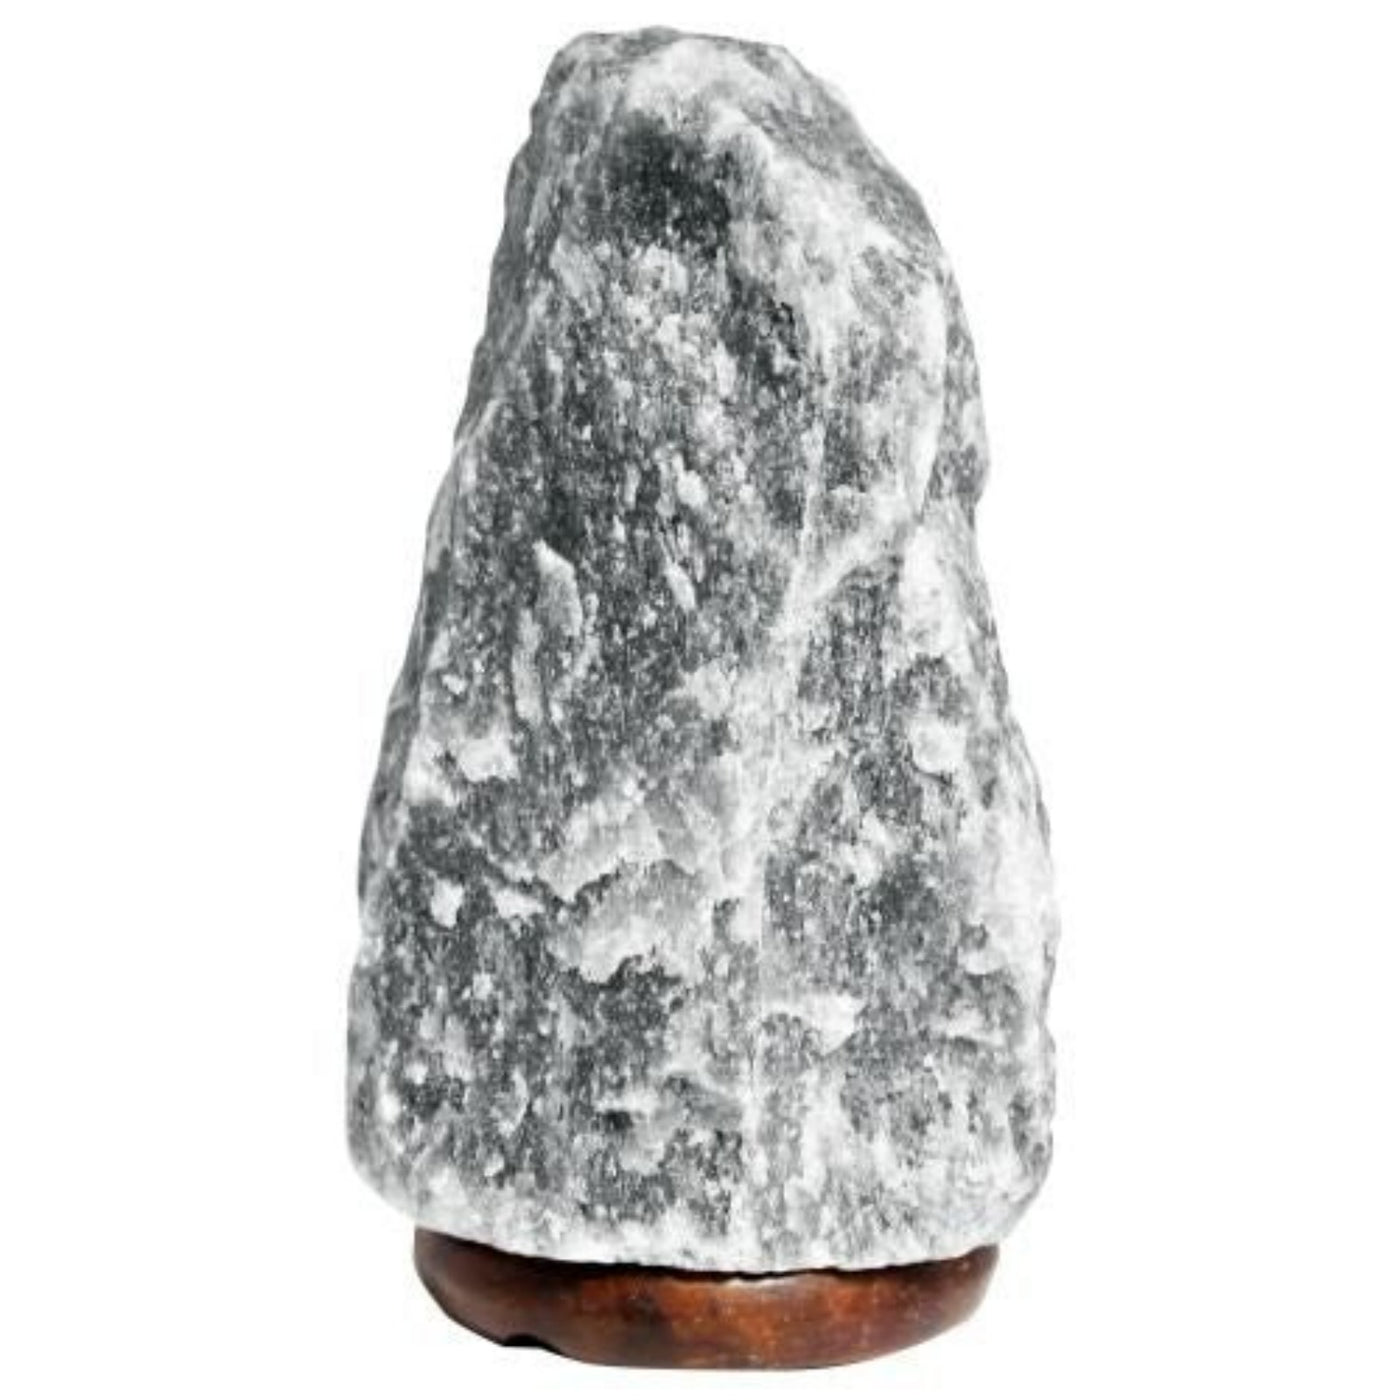 Grey Himalayan Rock Salt Lamp On A wooden Stand - 1.5-2kg.